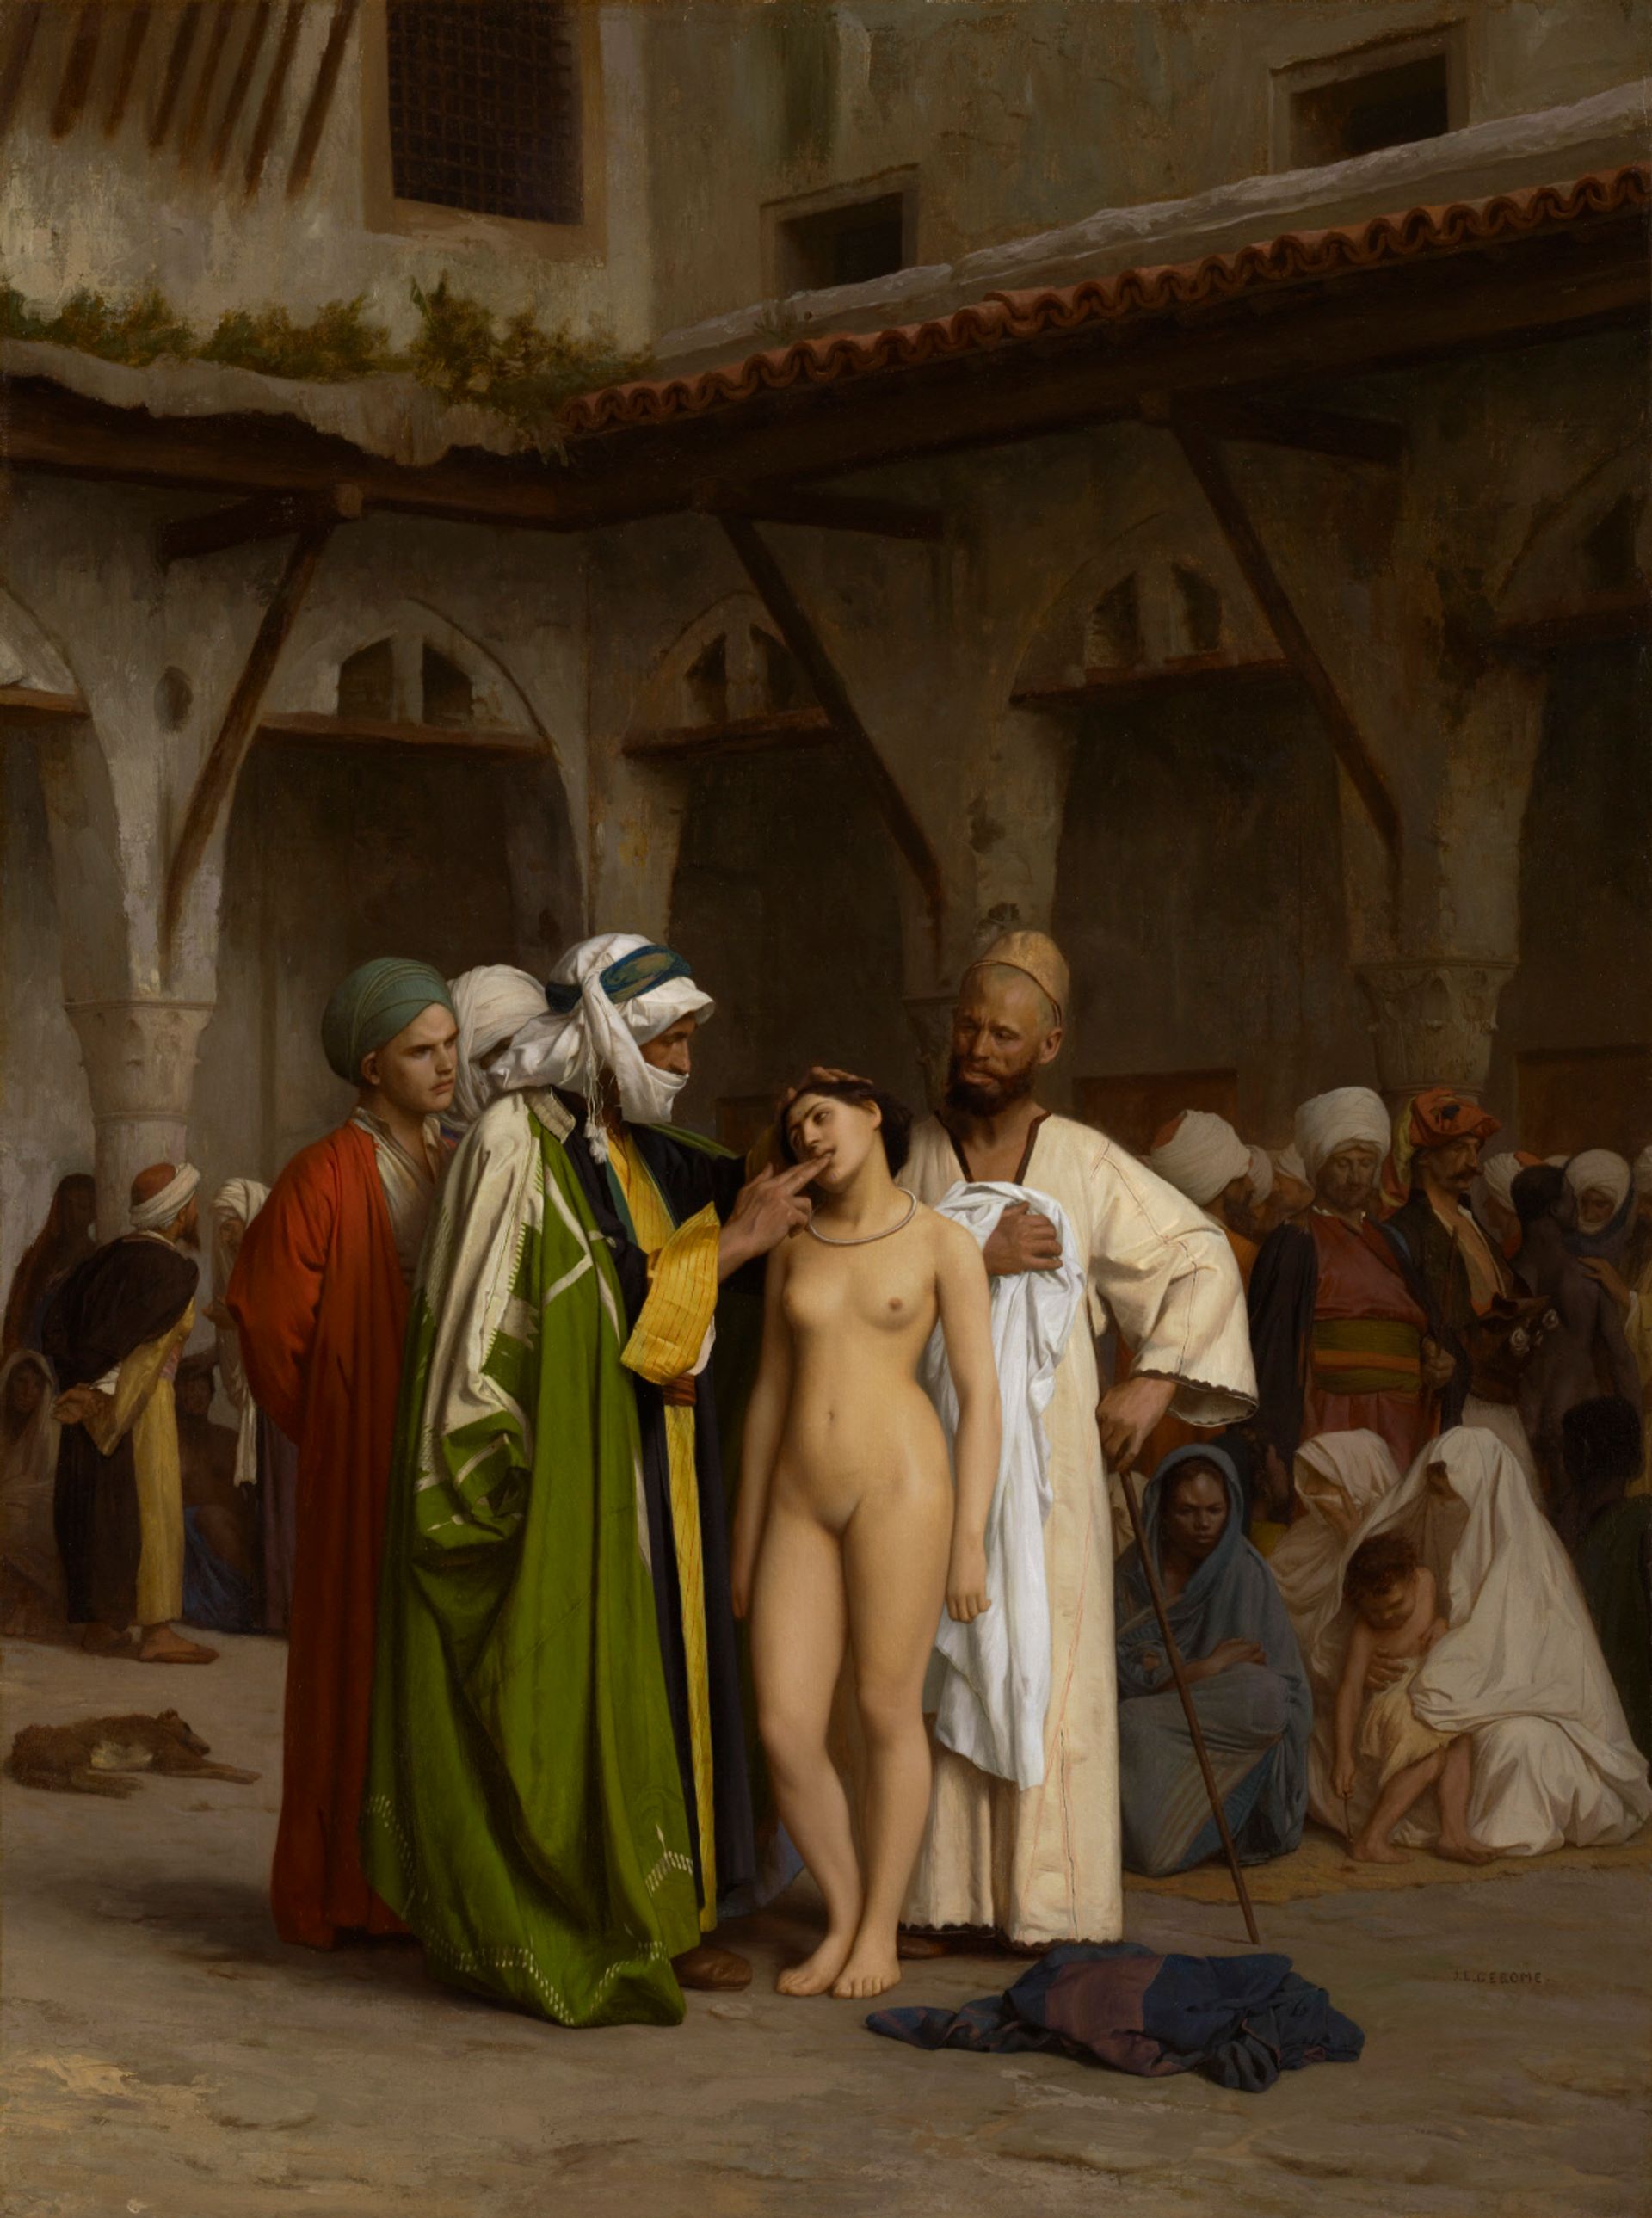 Jean-Léon Gérôme’s Slave Market (1866) is in the collection of the Clark Art Institute in Williamstown, Massachusetts 